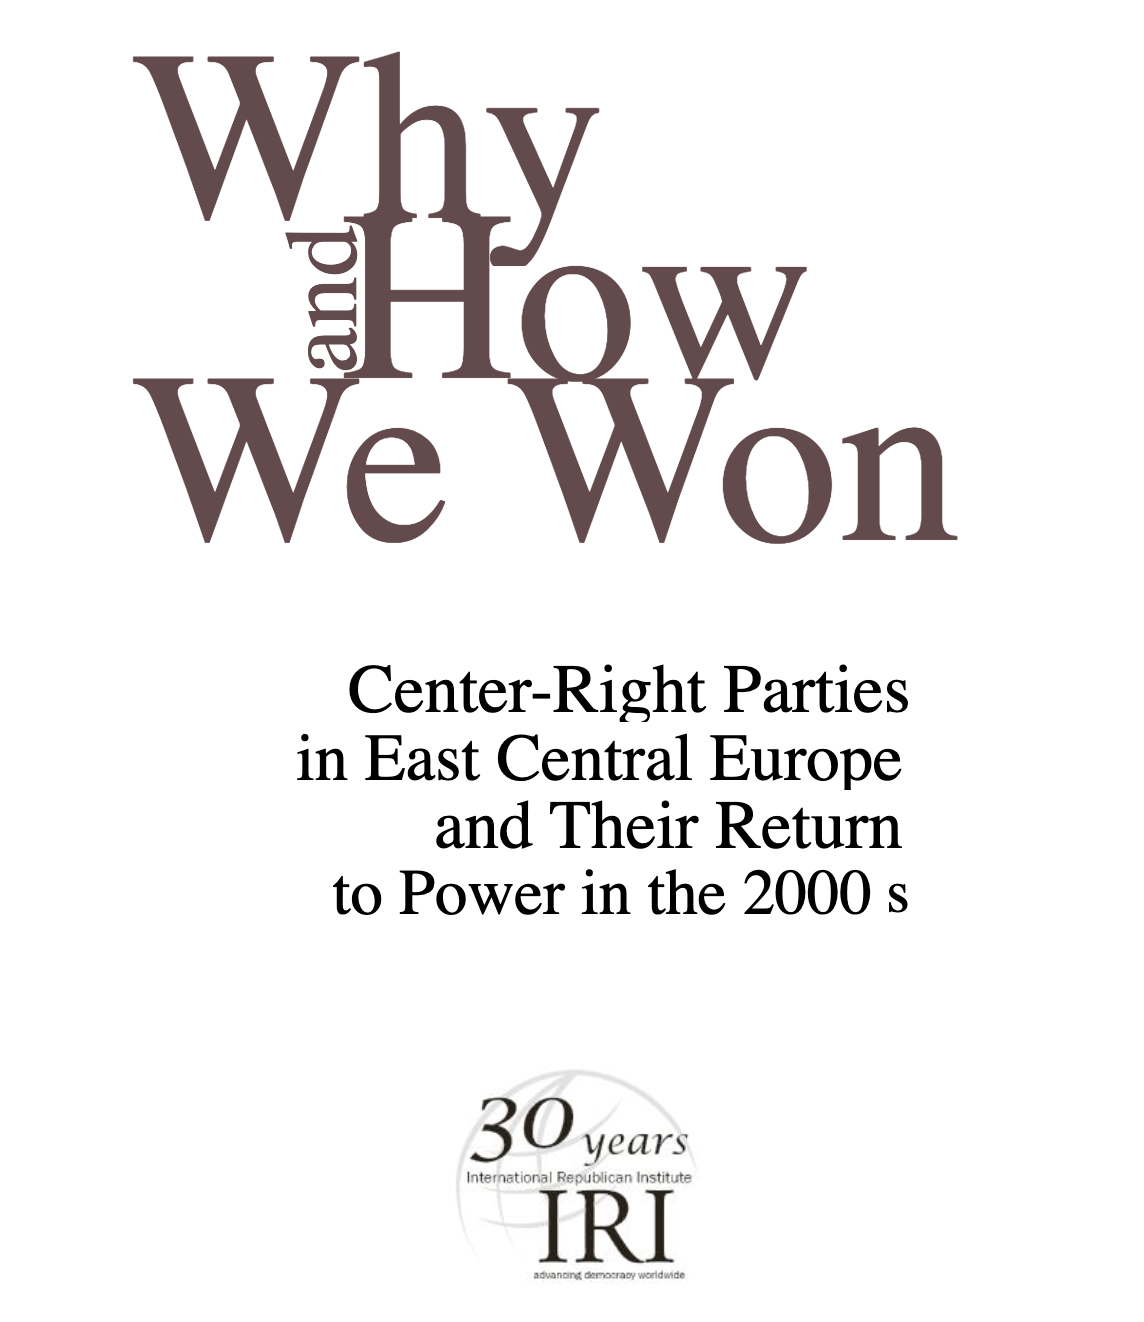 Why and How We Won: Center-Right Parties in East Central Europe and Their Return to Power in the 2000s